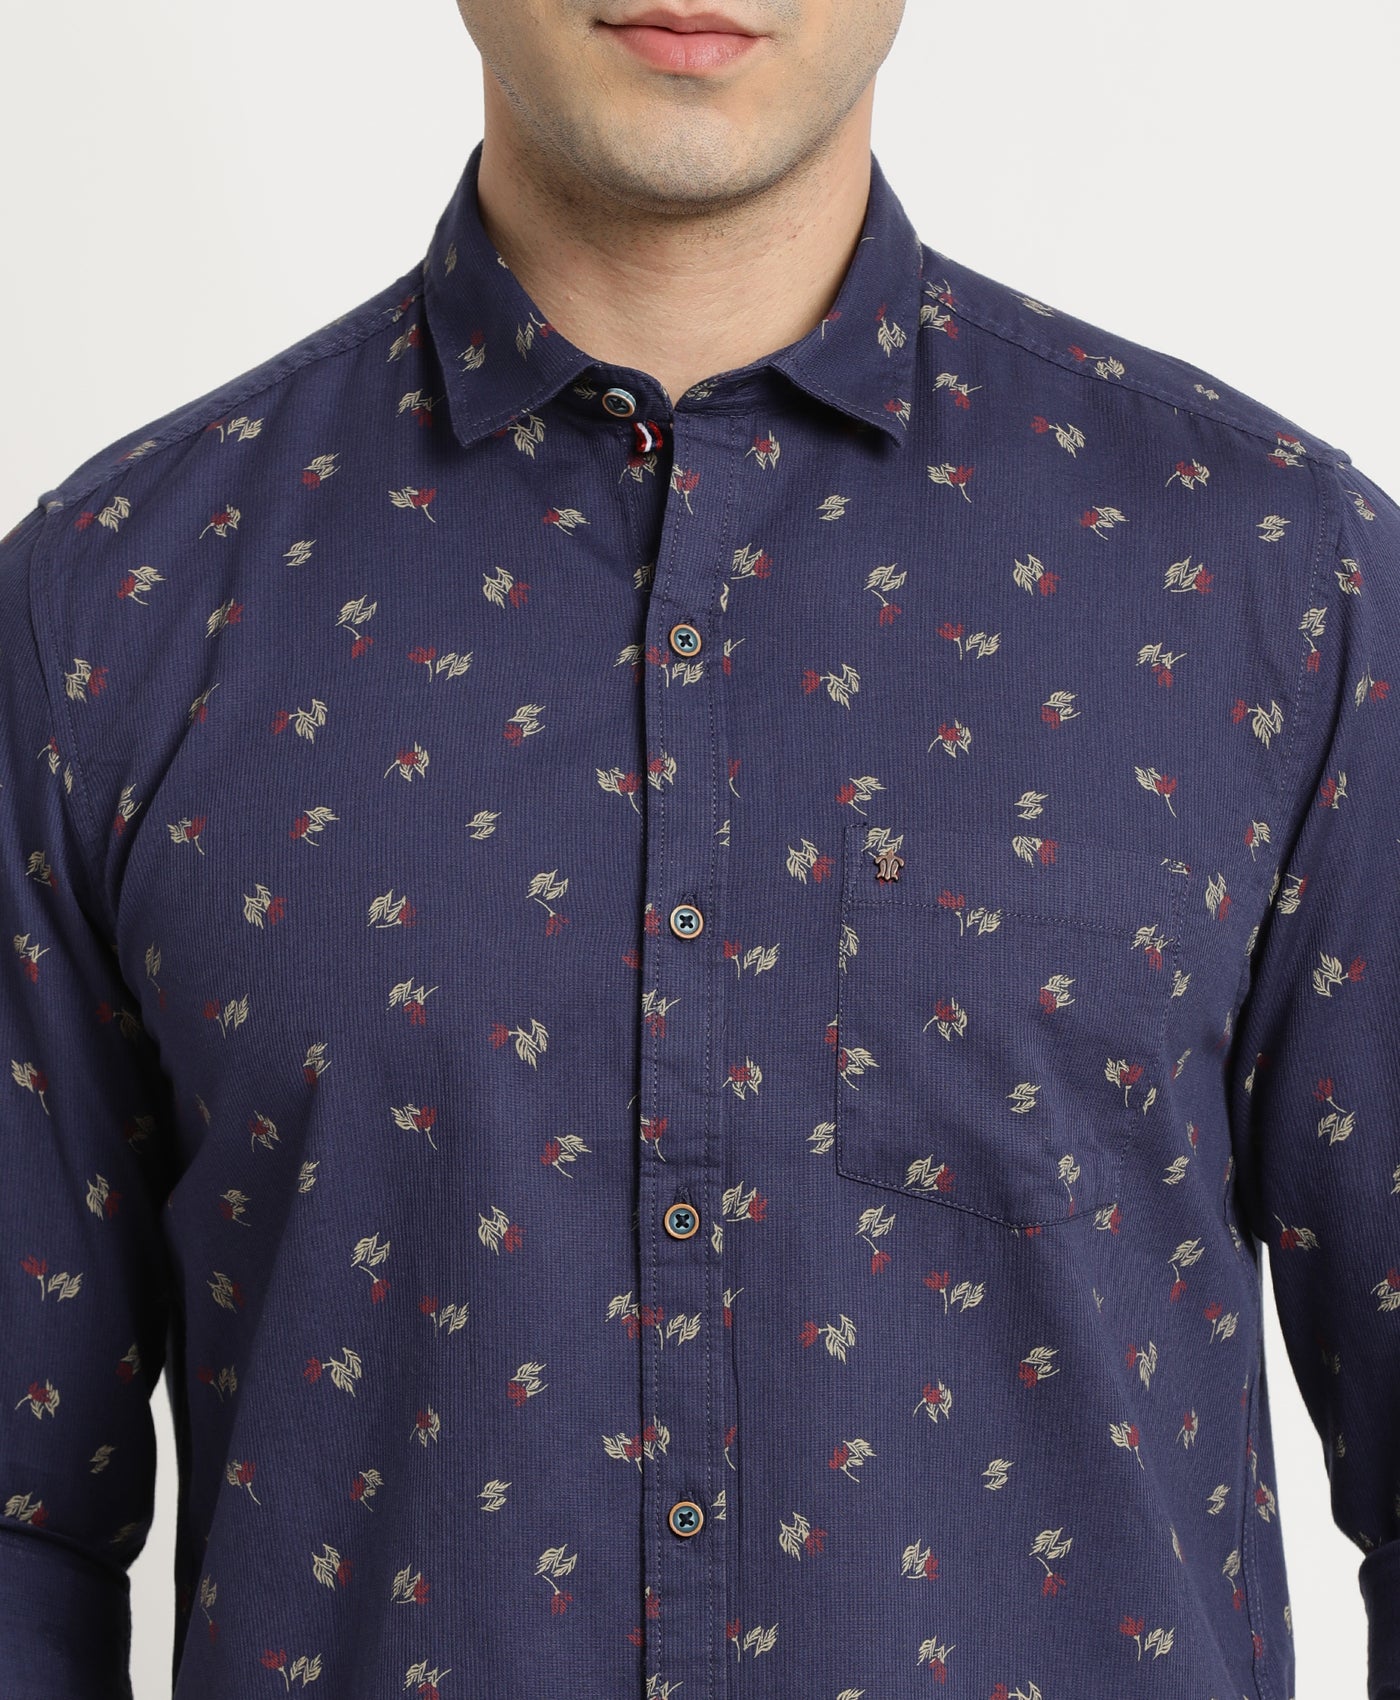 100% Cotton Navy Blue Printed Slim Fit Full Sleeve Casual Shirt